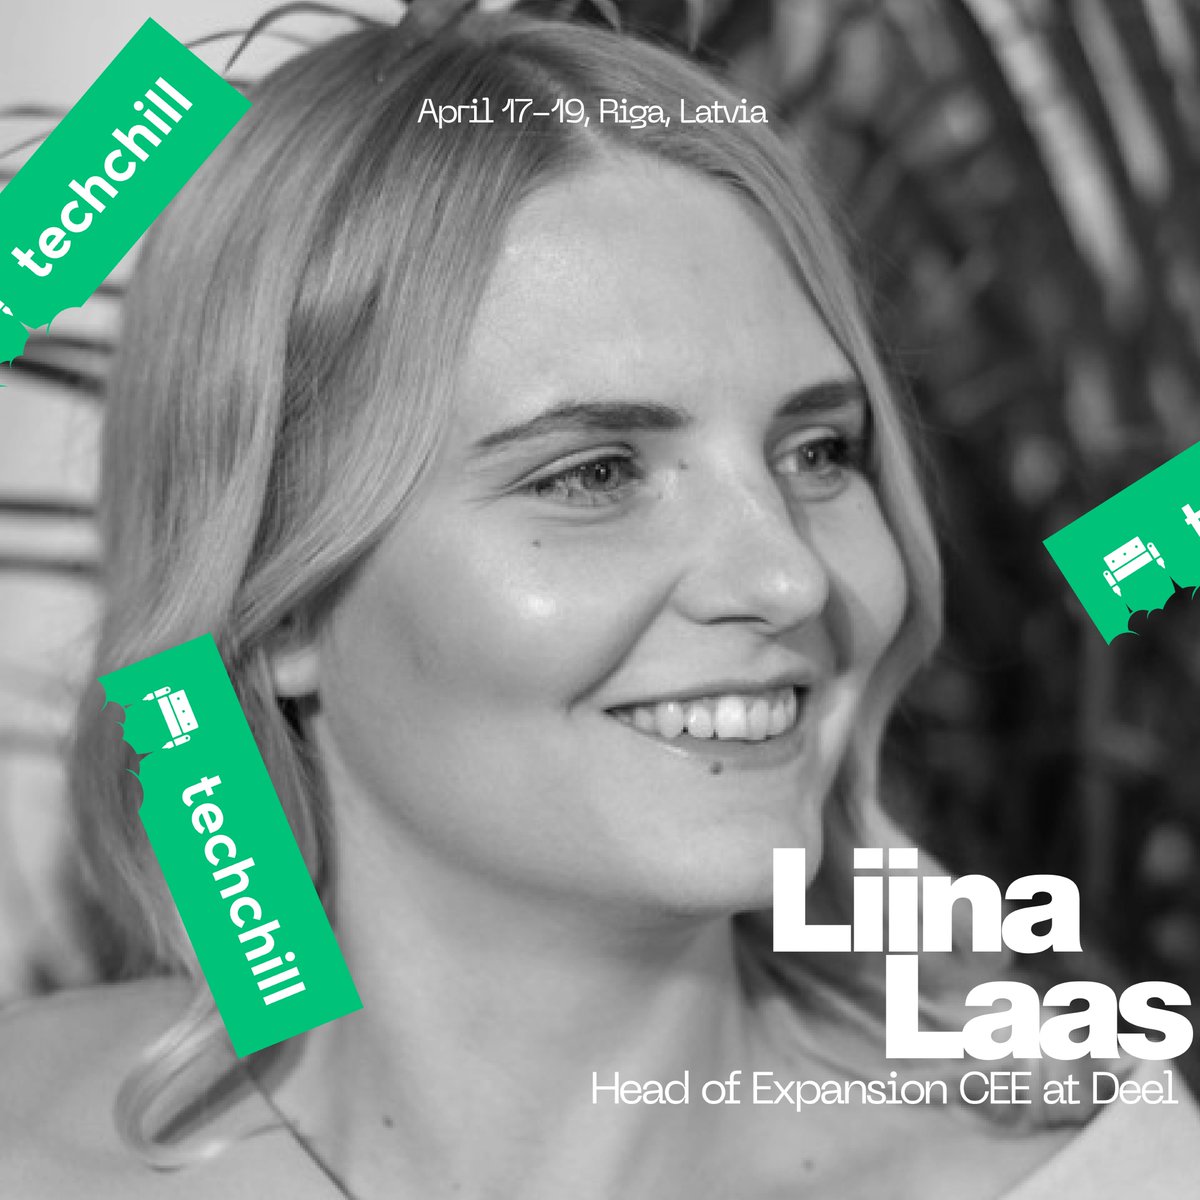 Join us in welcoming Liina Laas, Head of Expansion CEE at @deel, as a speaker for TechChill 2024! Learn firsthand how Liina facilitates global hiring for companies, ensuring compliance every step of the way. Don't miss out! See you in Riga on April 17-19! 🚀